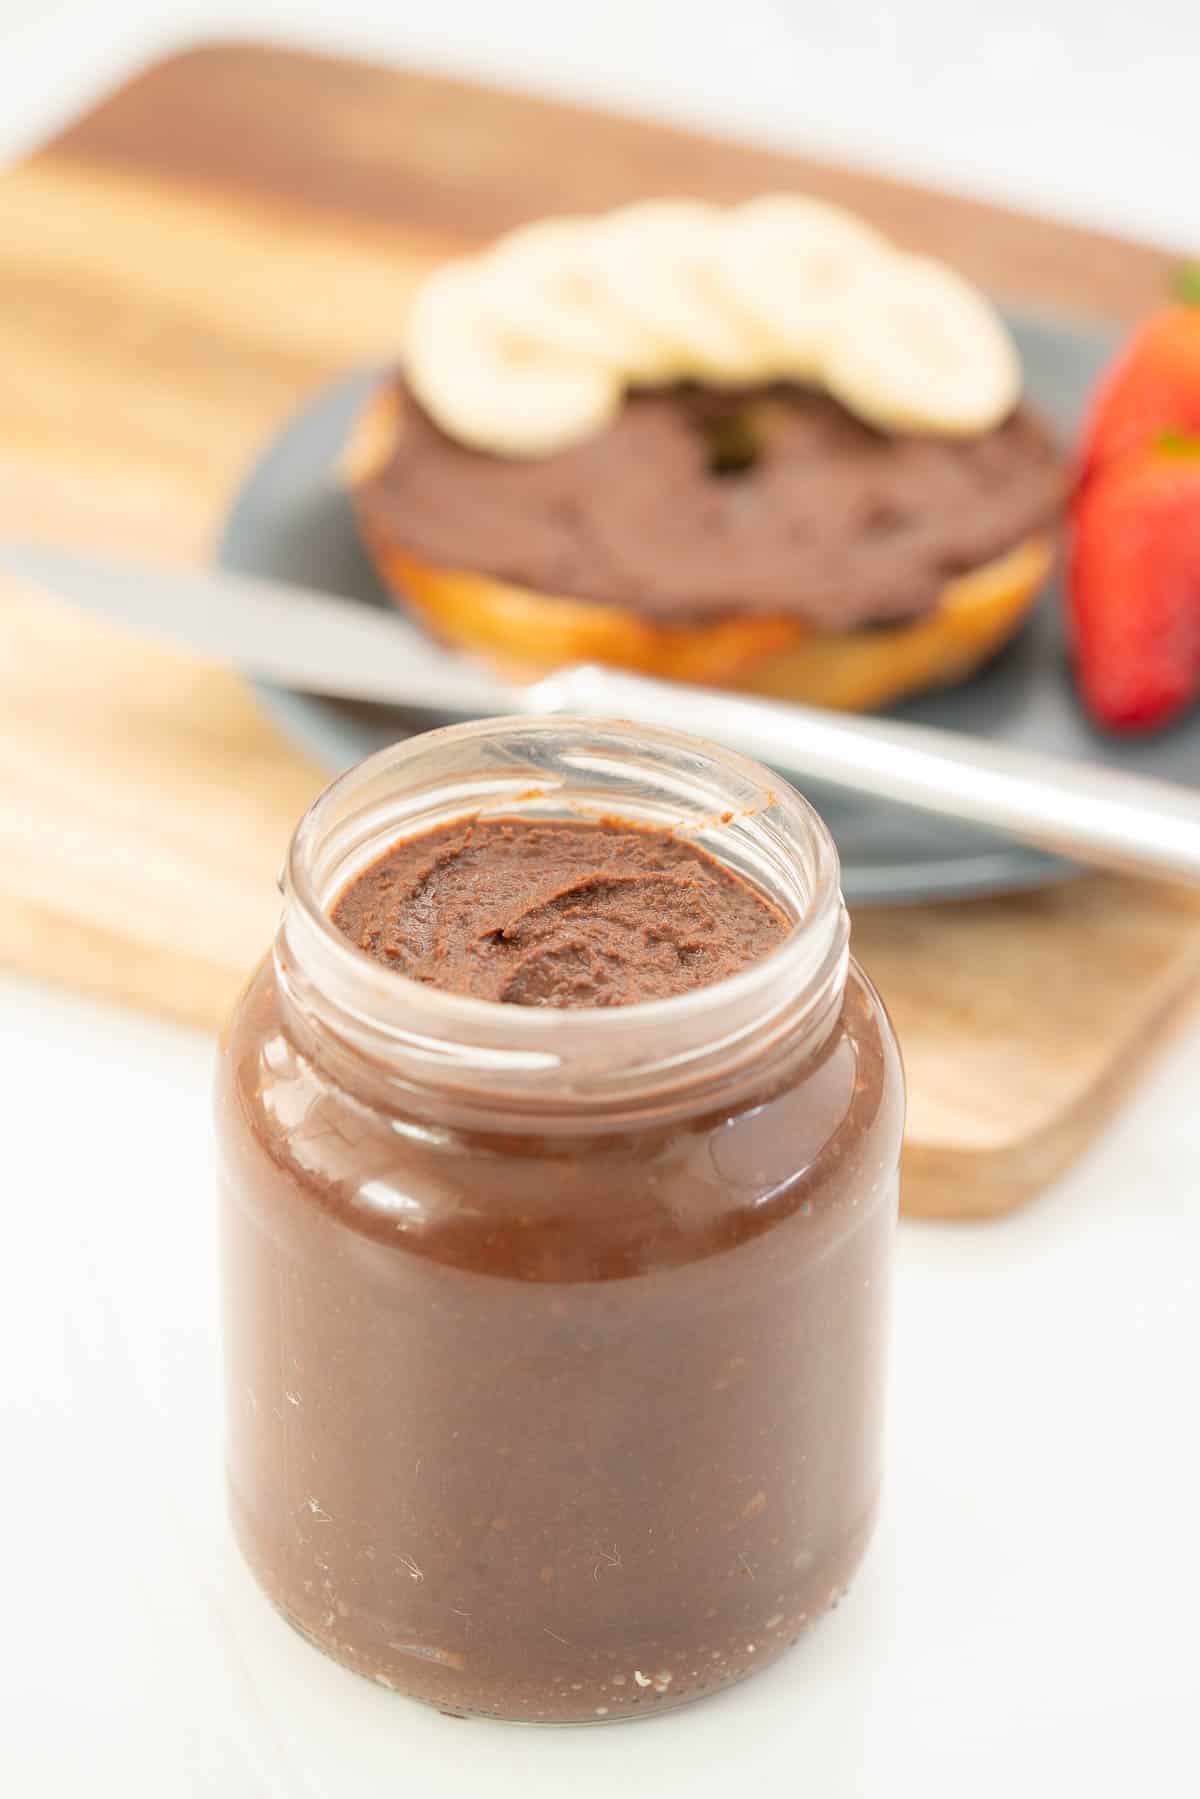 A jar of chocolate spread sitting in front of a bagel, plate and knife. 